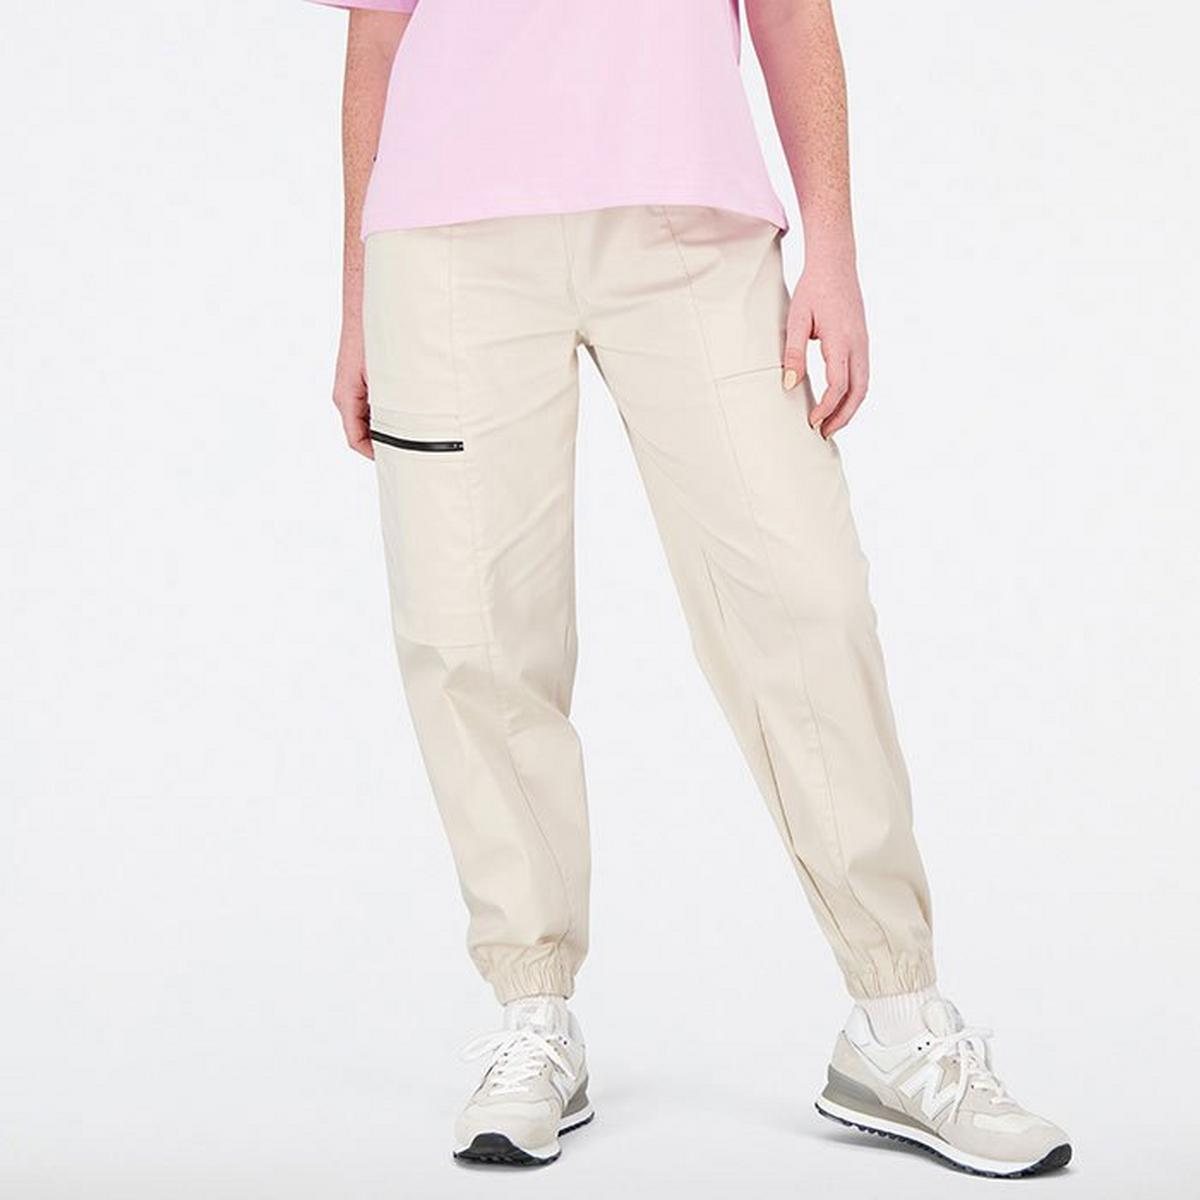 Women's AT Woven Pant